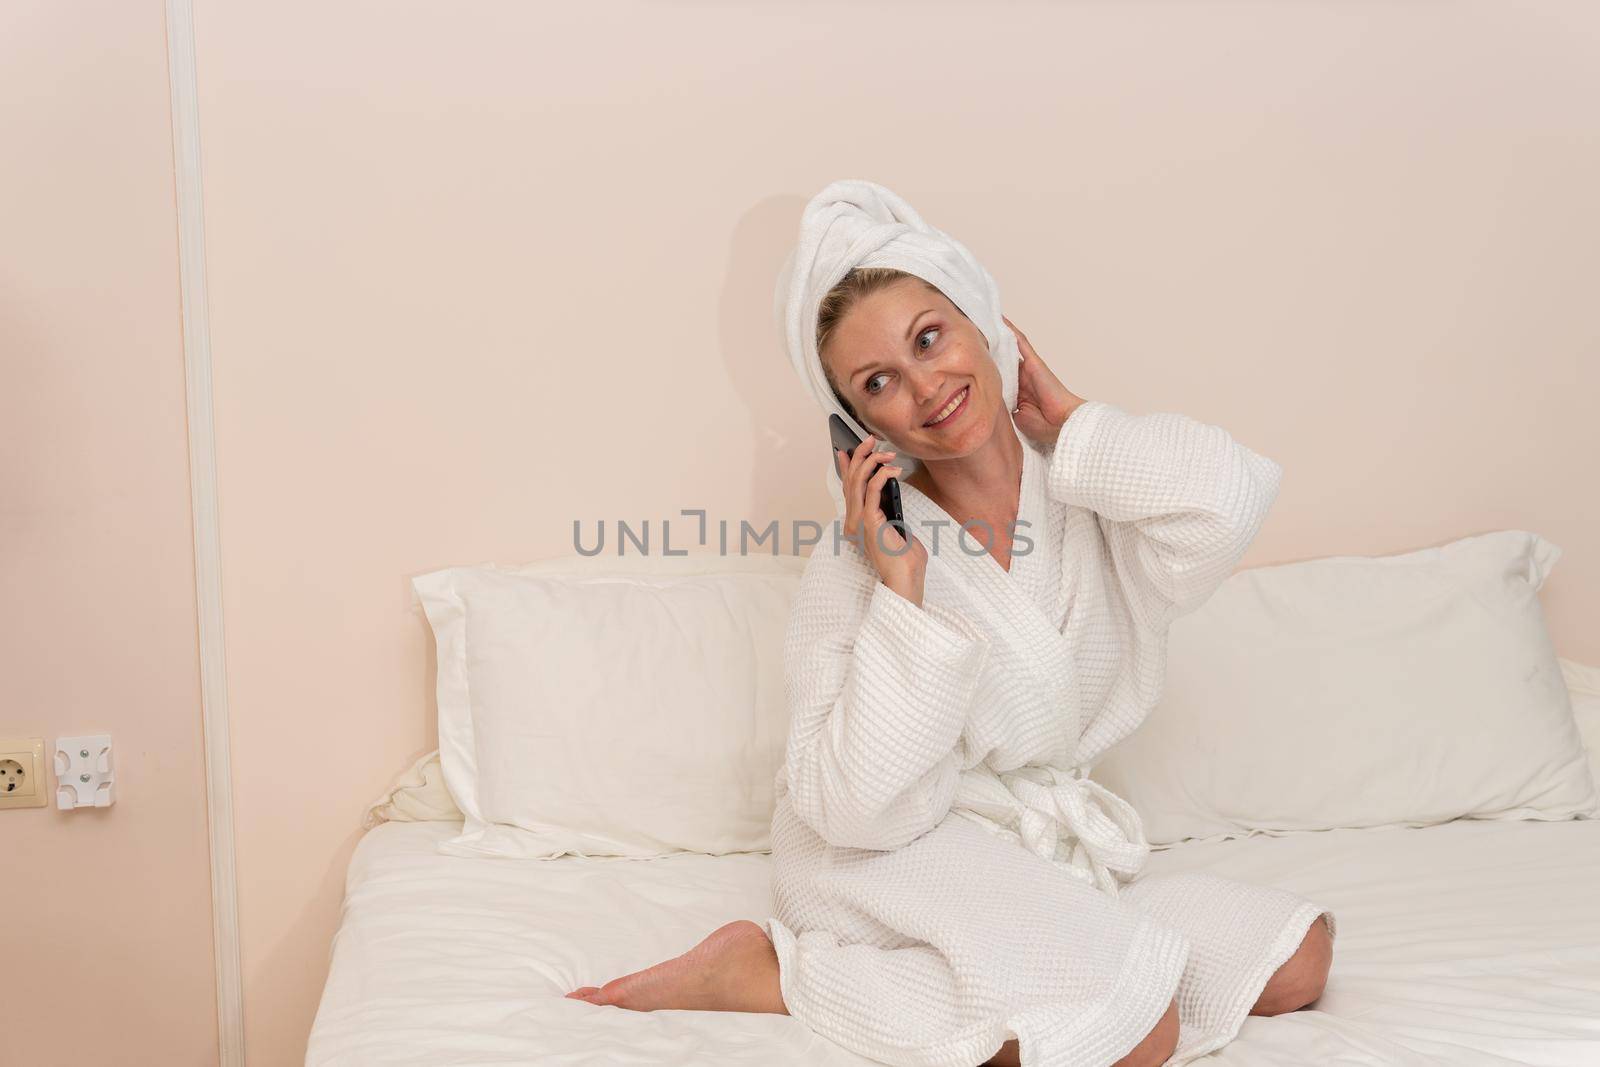 Cell female bed beauty copyspace spa bathrobe care bathroom untying, from preparing young for relax and beautiful skin, lifestyle dressing. Hygiene therapy american, by 89167702191